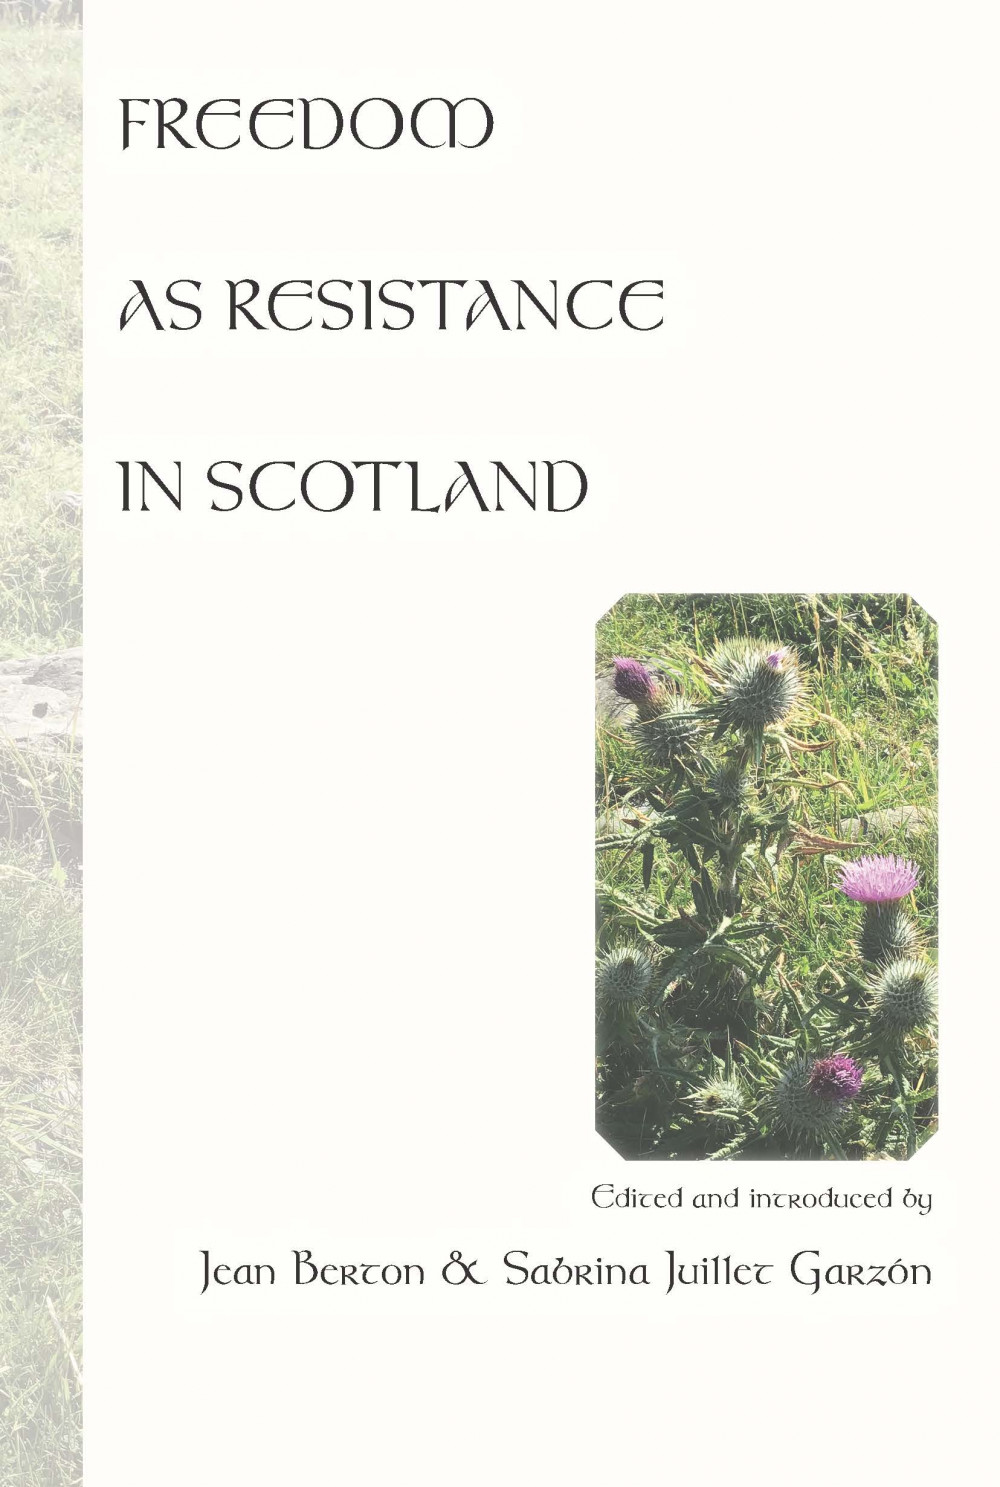 Freedom as Resistance in Scotland